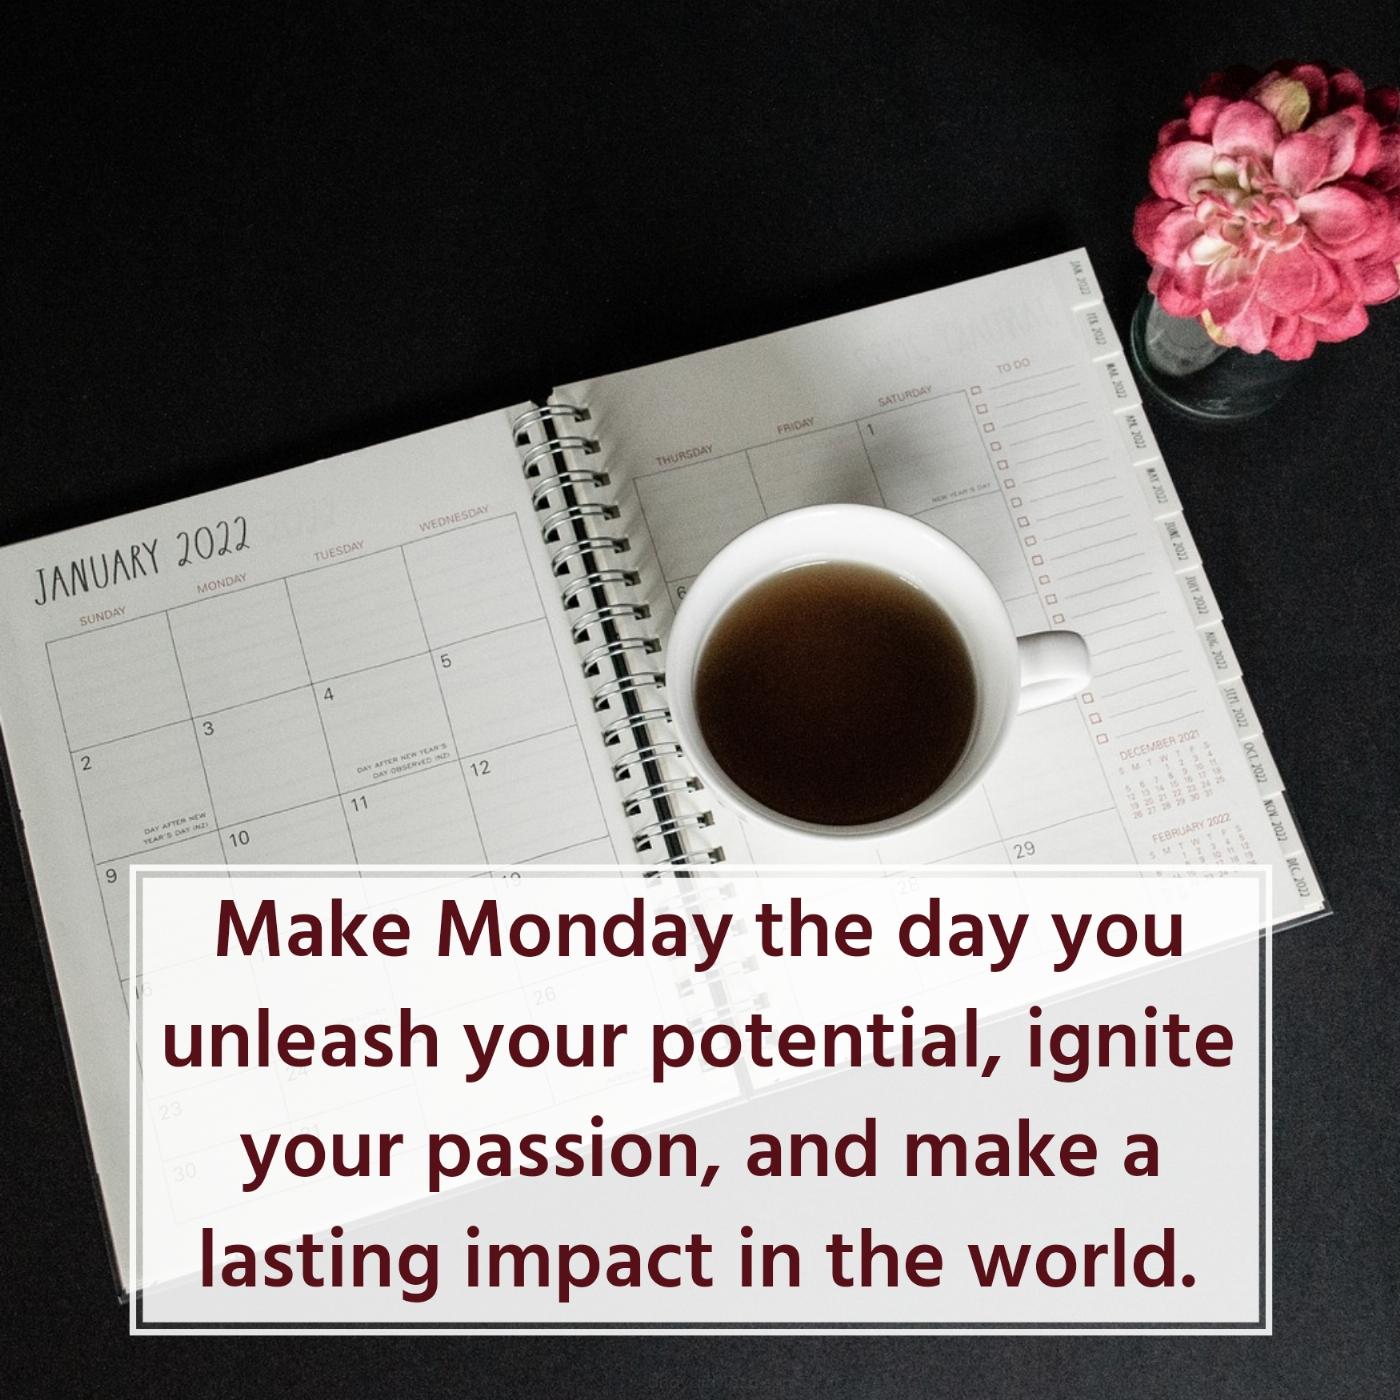 Make Monday the day you unleash your potential